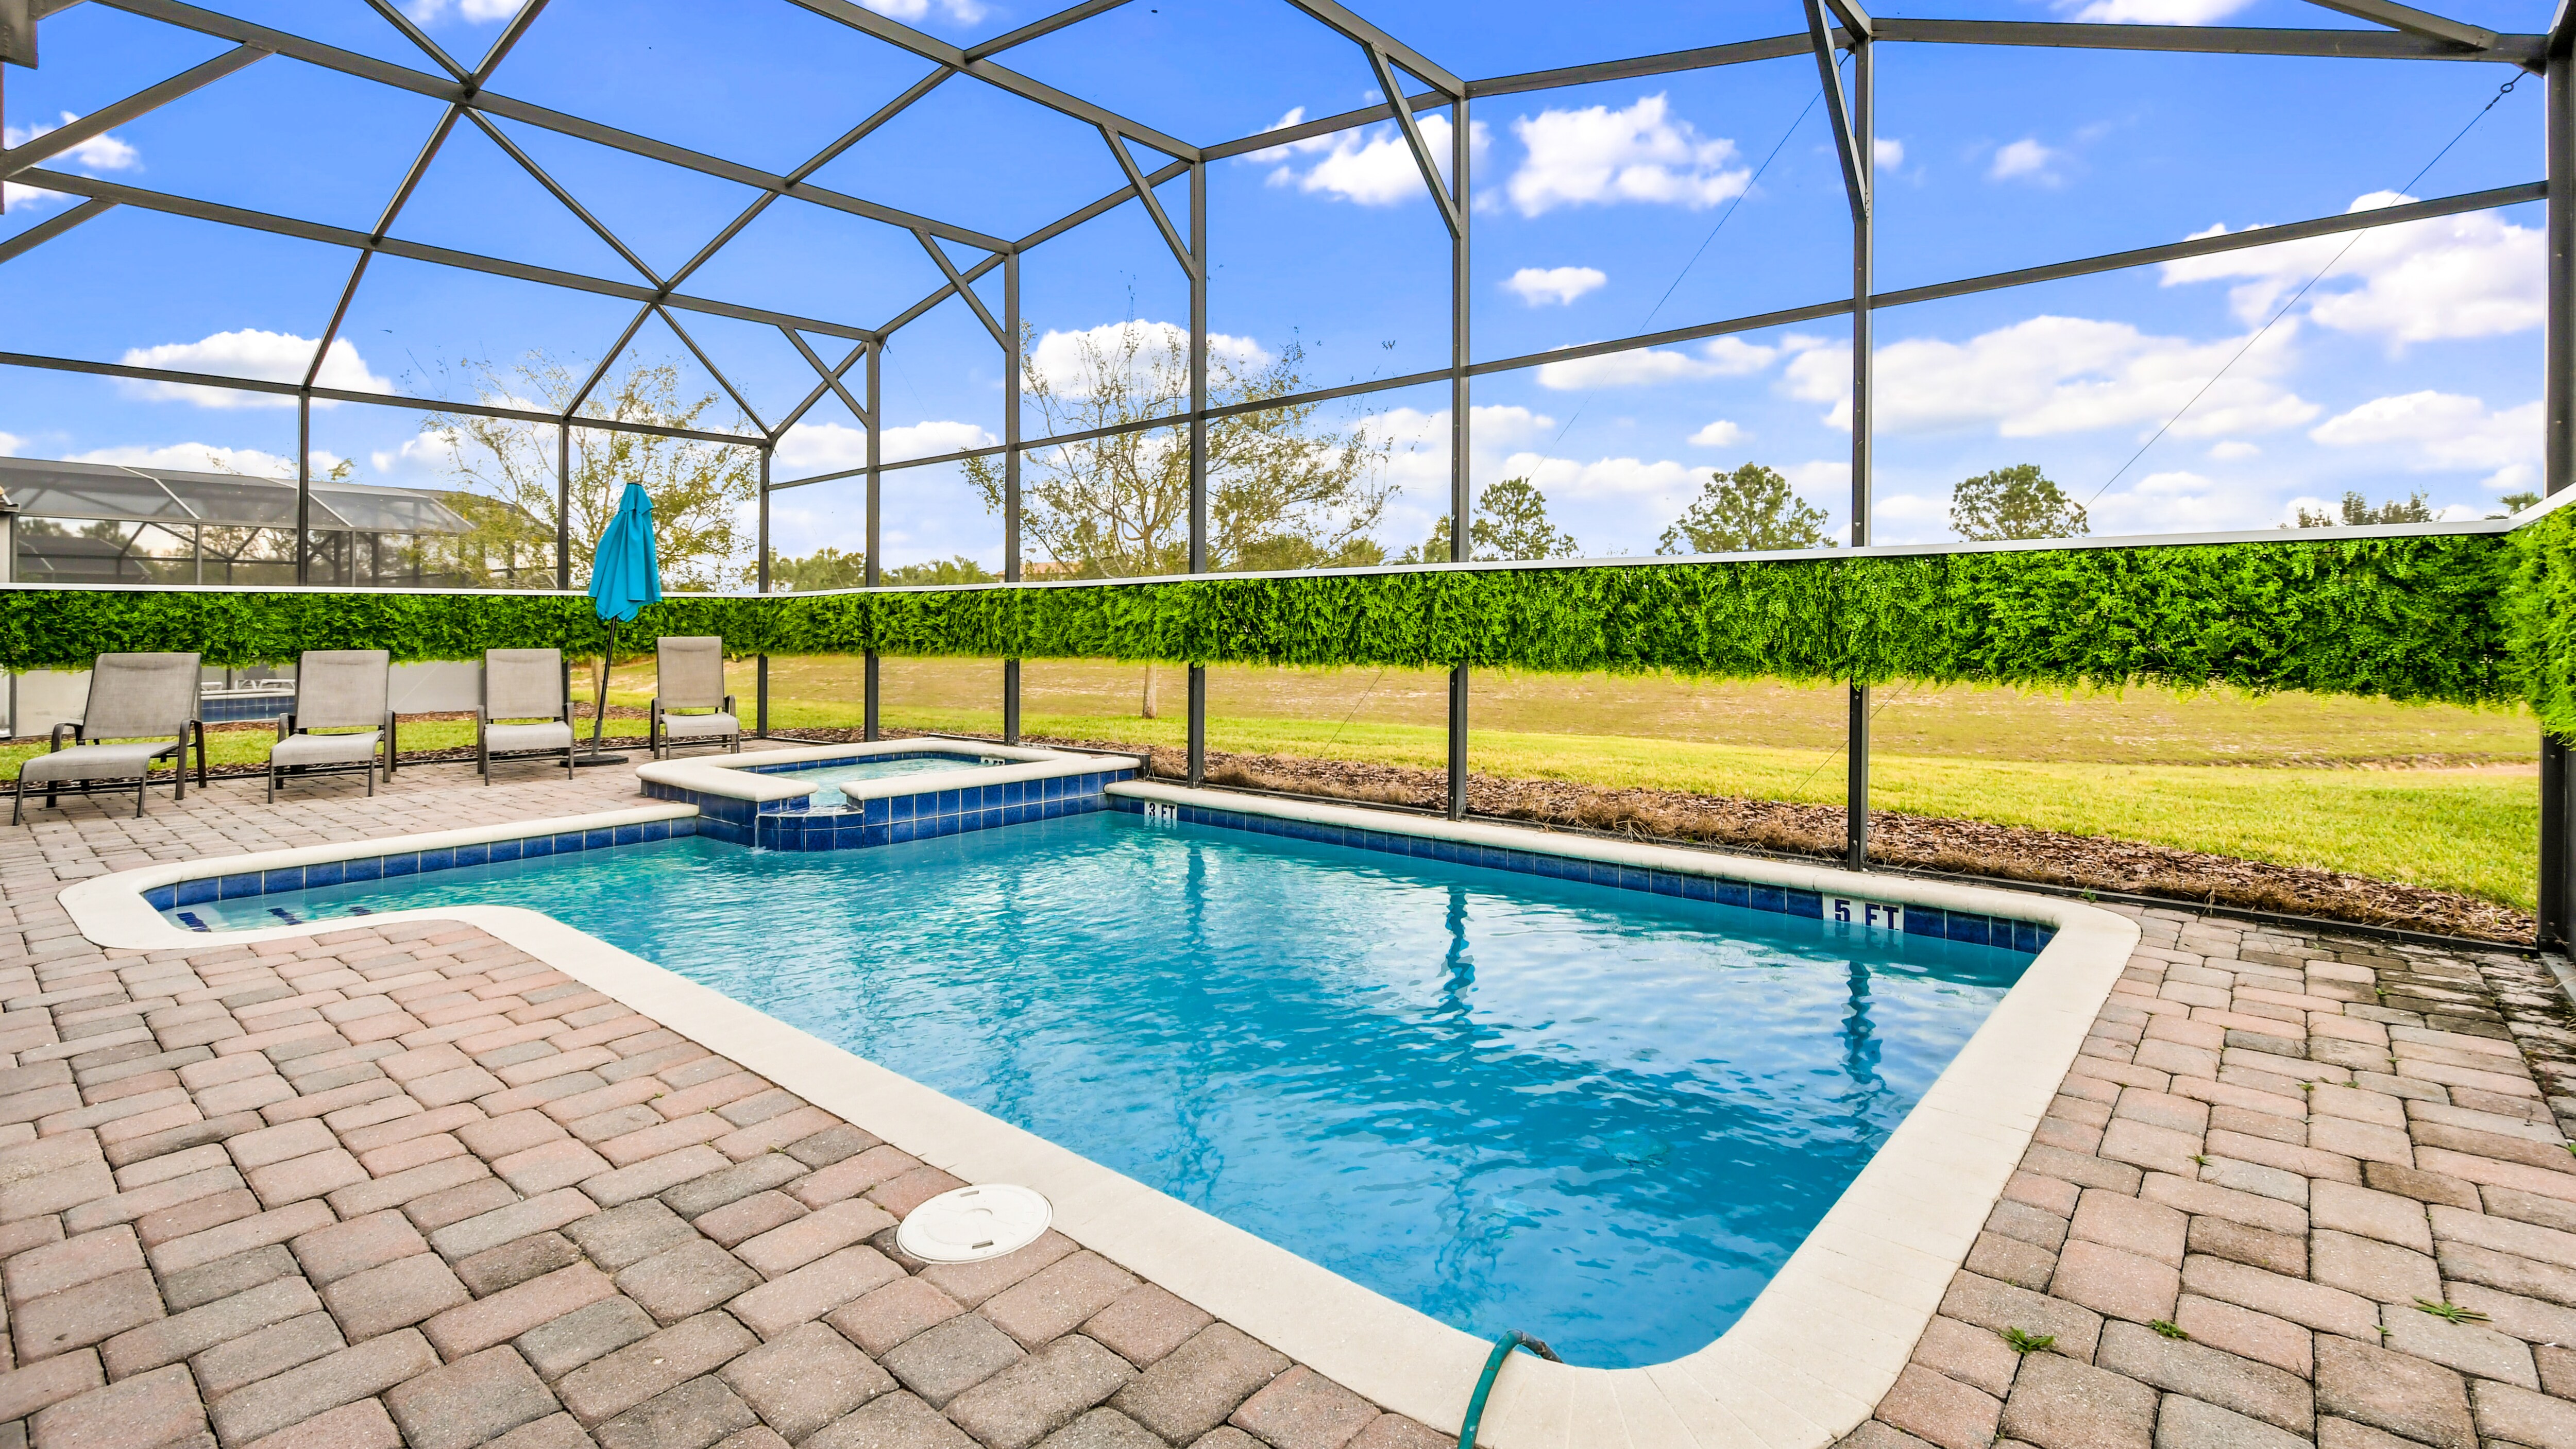 Screened outdoor pool, blending the joys of swimming with a sheltered and private oasis